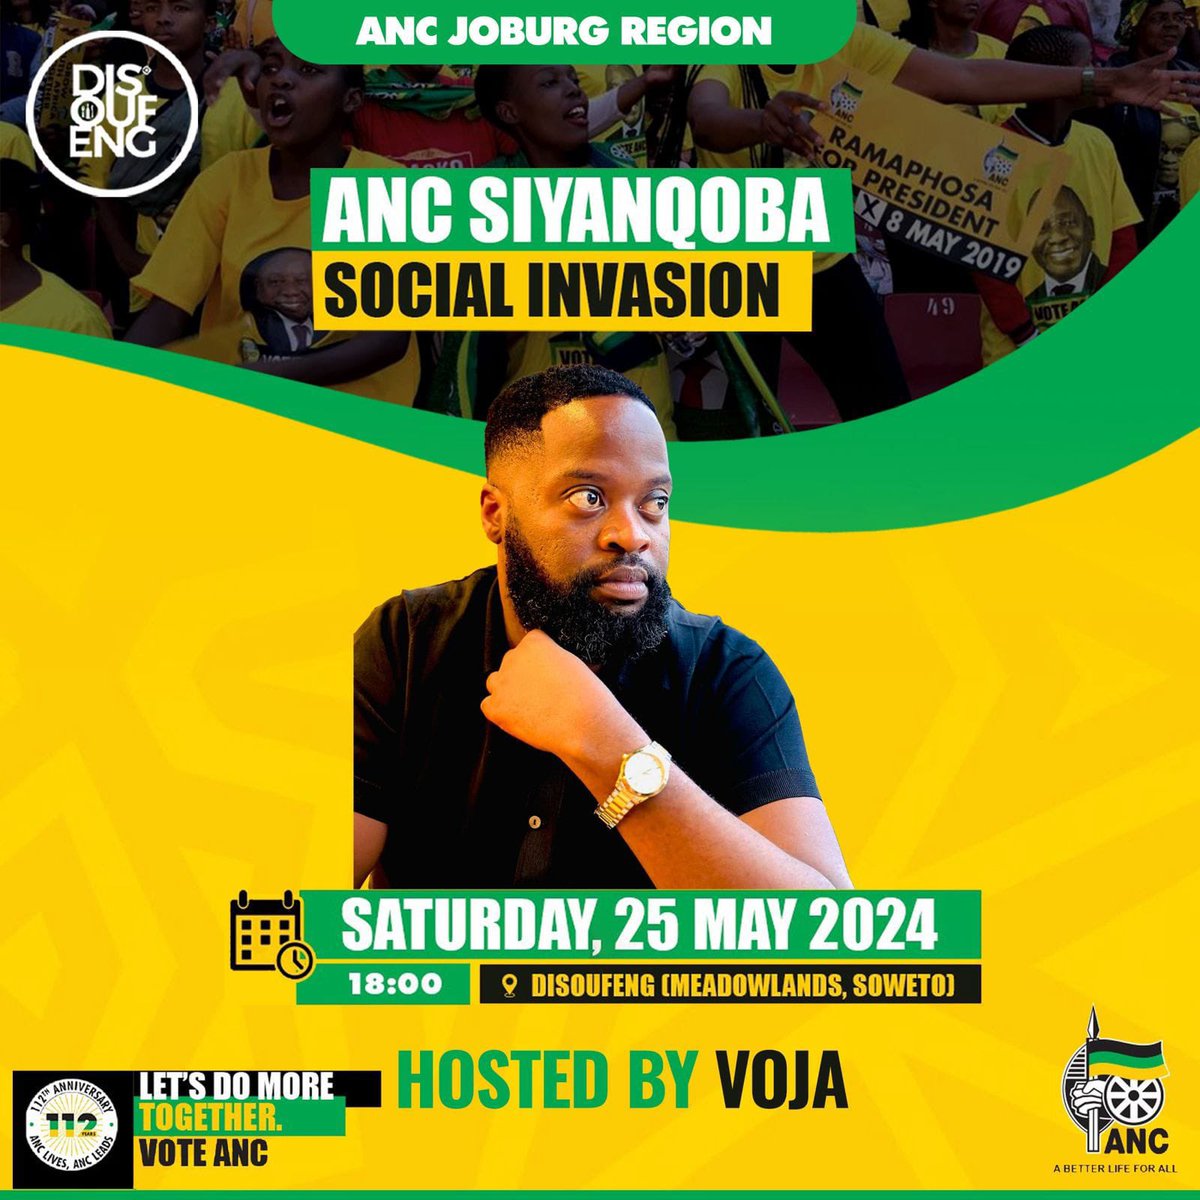 incredibly committed to the #AncAtDisoufeng #SiyanqobaRally, which is going down Bafethu SiyanqobaRally Nomonde will be hosting; let's work together to accomplish more and vote ANC 🔥👌👶 @DISOUFENG_PUB. Let us ensure we make the most 💃🖤